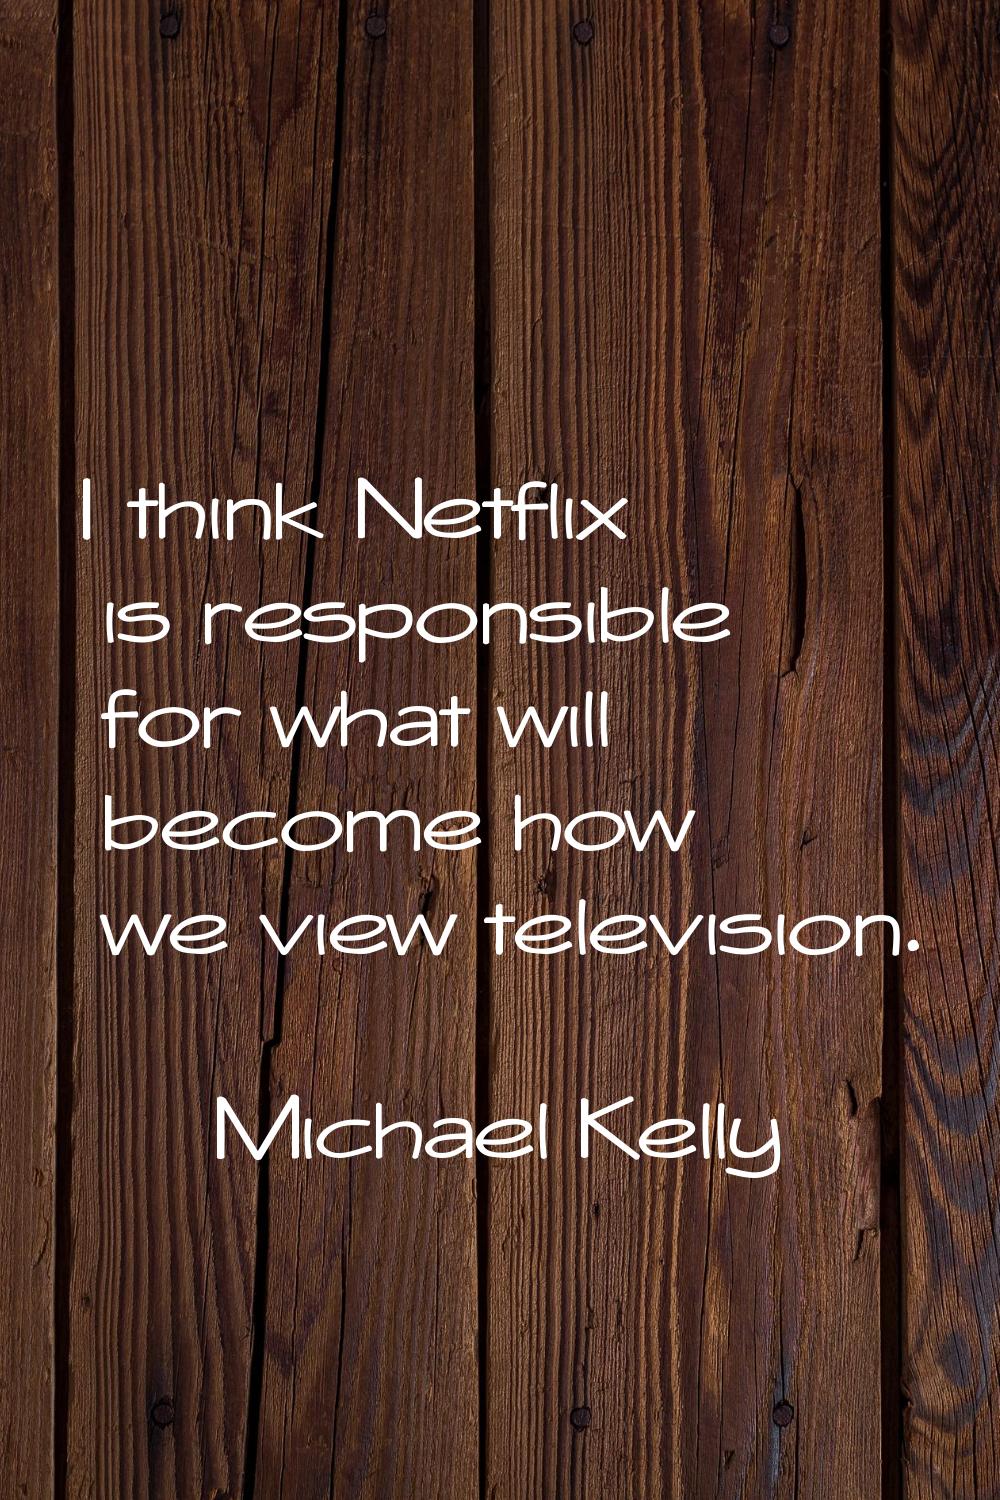 I think Netflix is responsible for what will become how we view television.